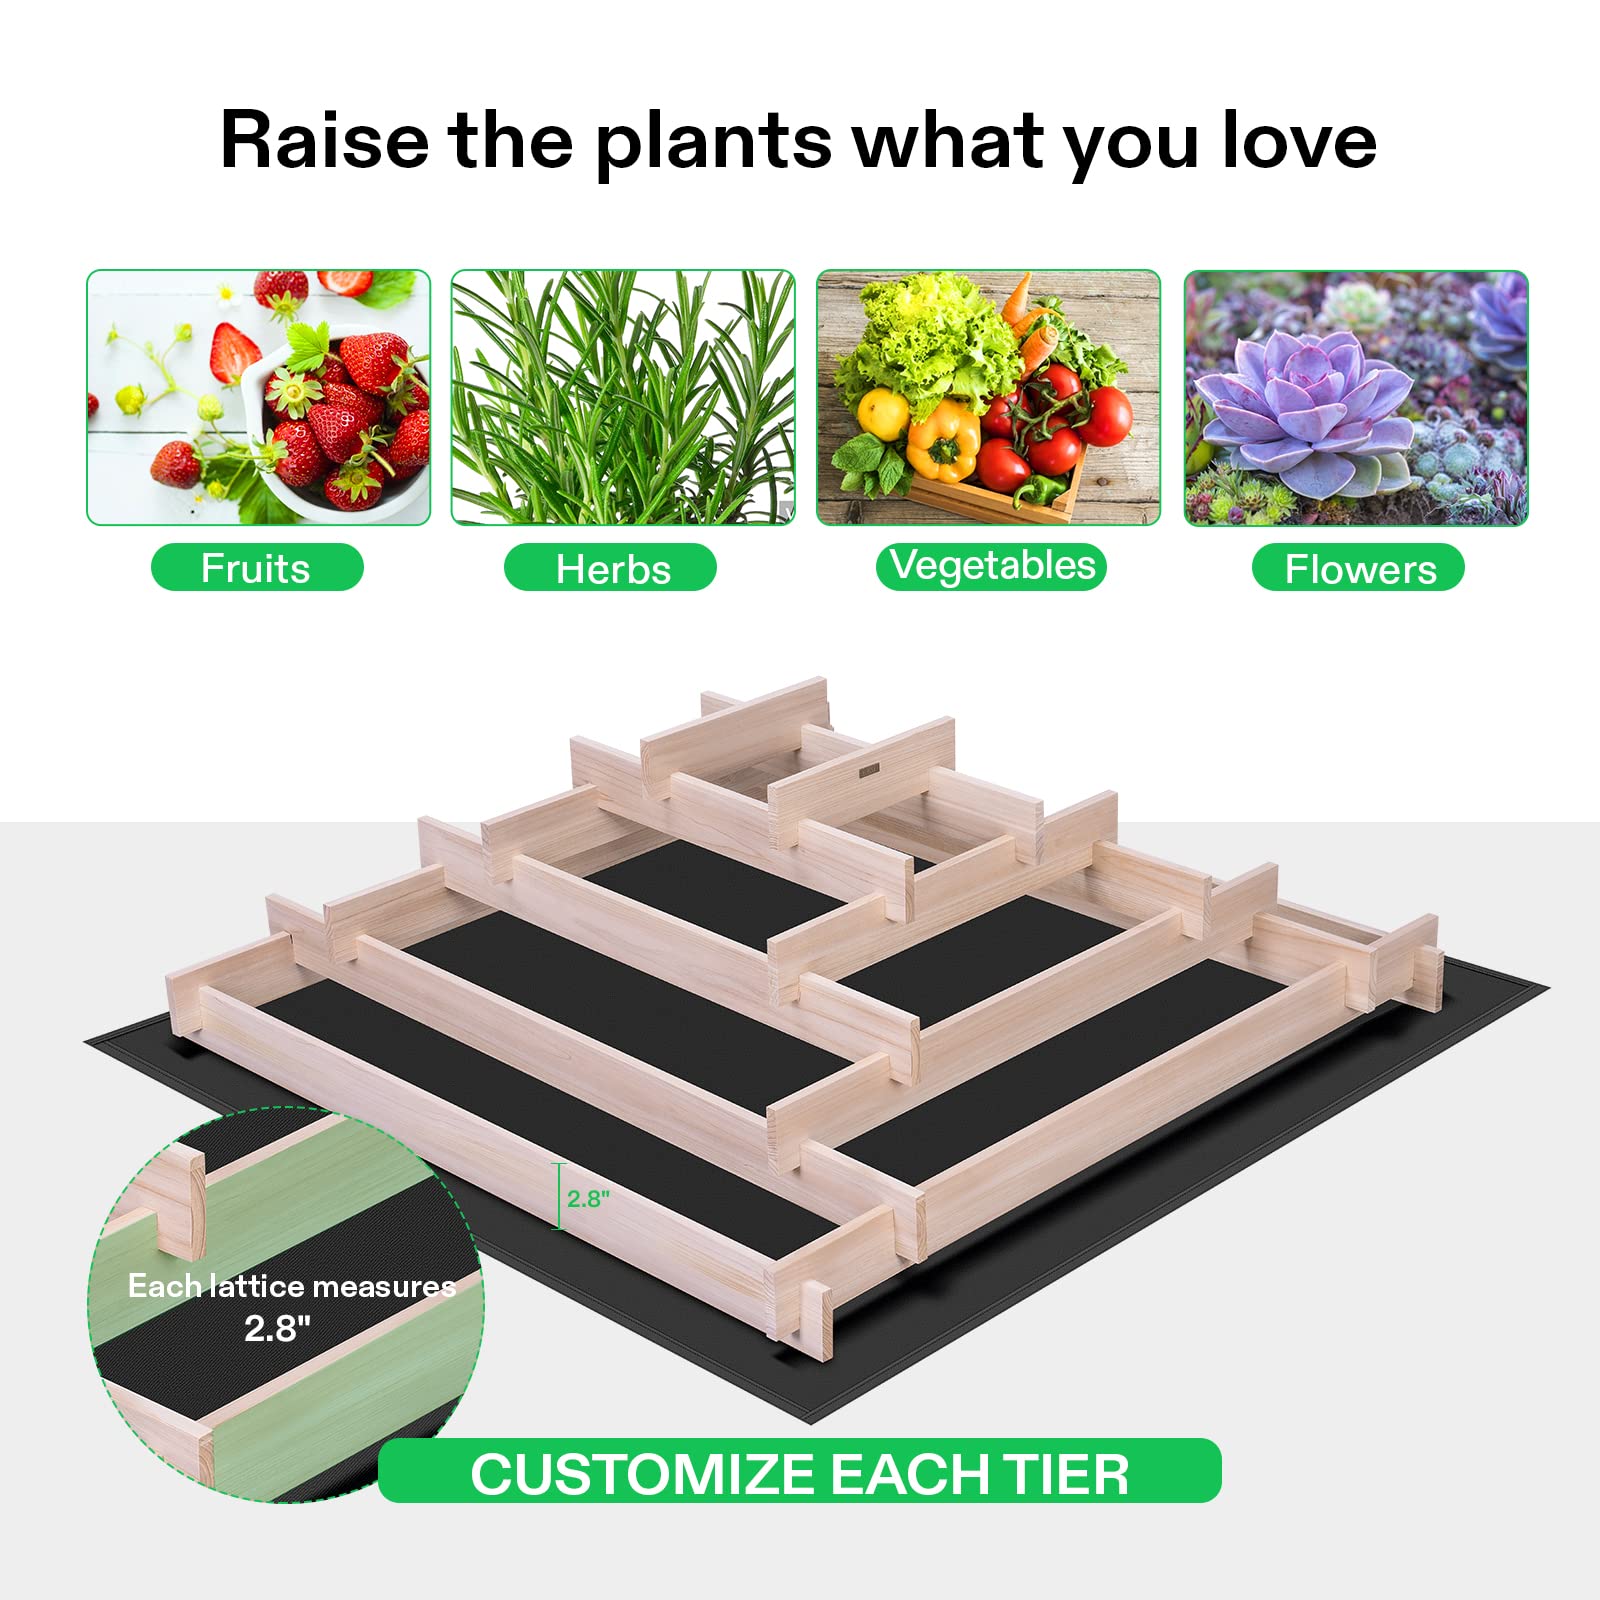 VIVOSUN 5-Tier Wooden Raised Garden Bed, 42 x 42 x 14 Inches, Outdoor Wood Planter Box with Gloves and Liner for Garden, Patio, Balcony, Backyard and Outdoors